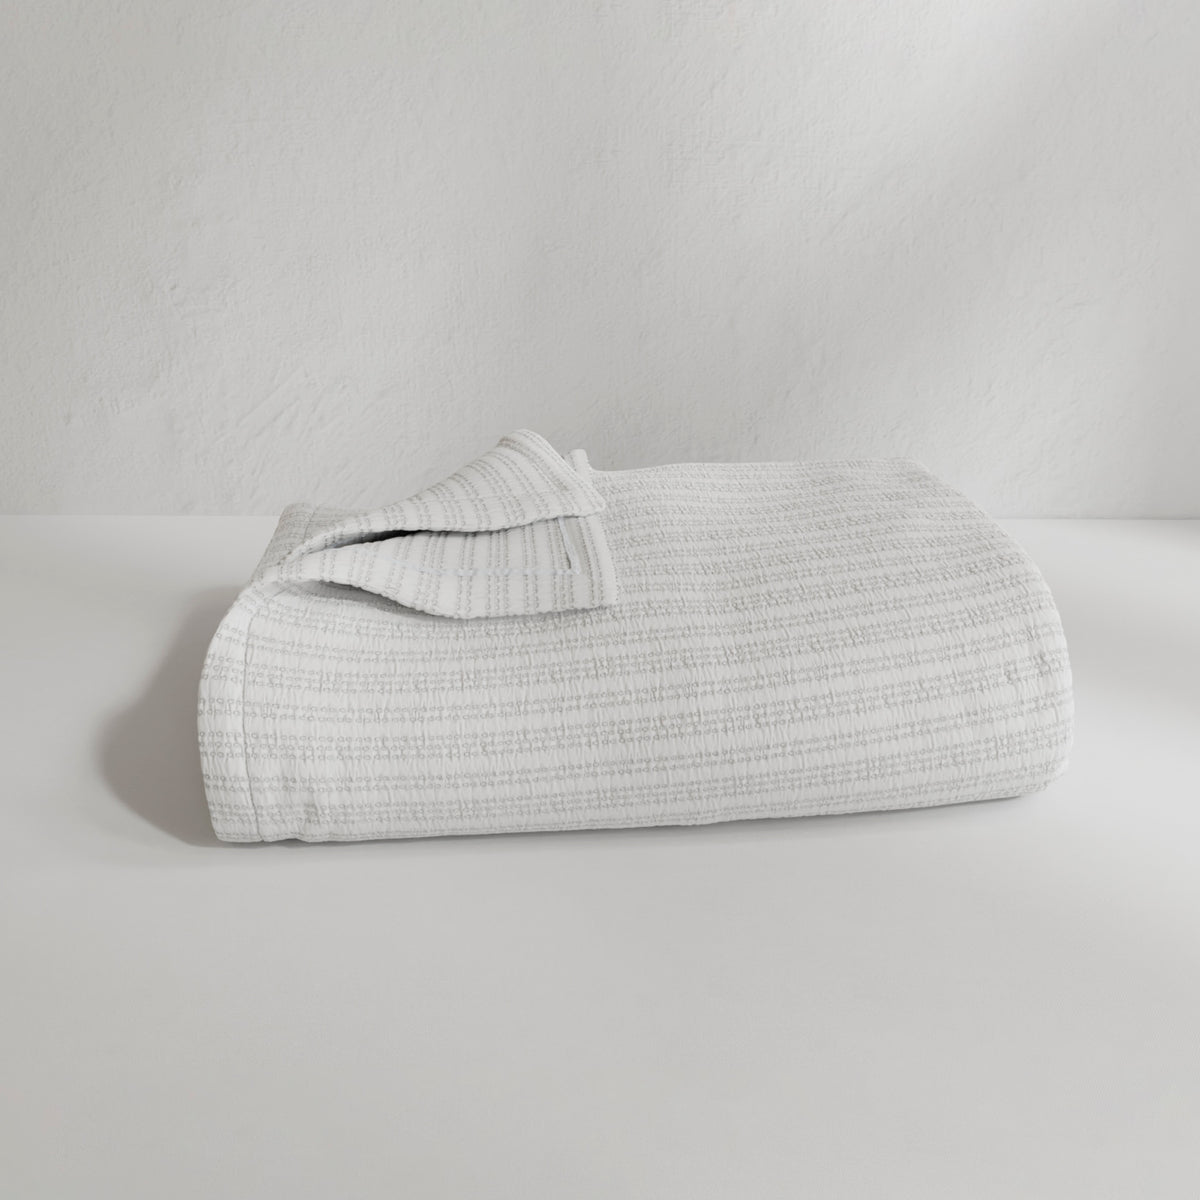 Image of a neatly folded Bright White Everyday Cotton Coverlet with the back left corner folded up on a white background